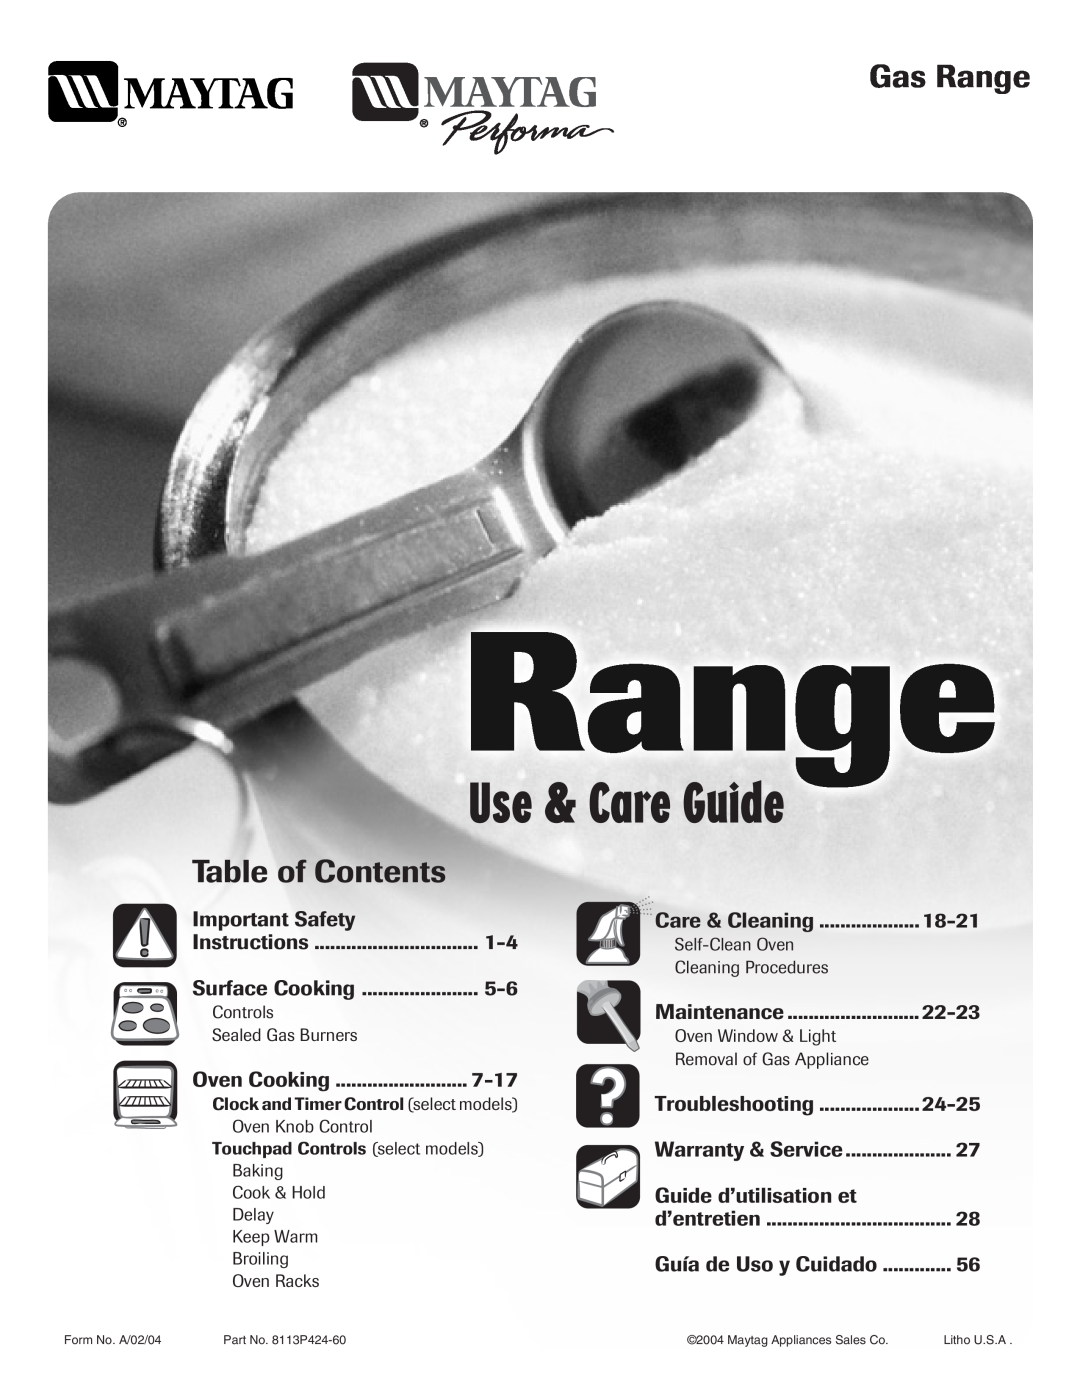 Maytag 8113P424-60 manual Use & Care Guide, Gas Range, Table of Contents 